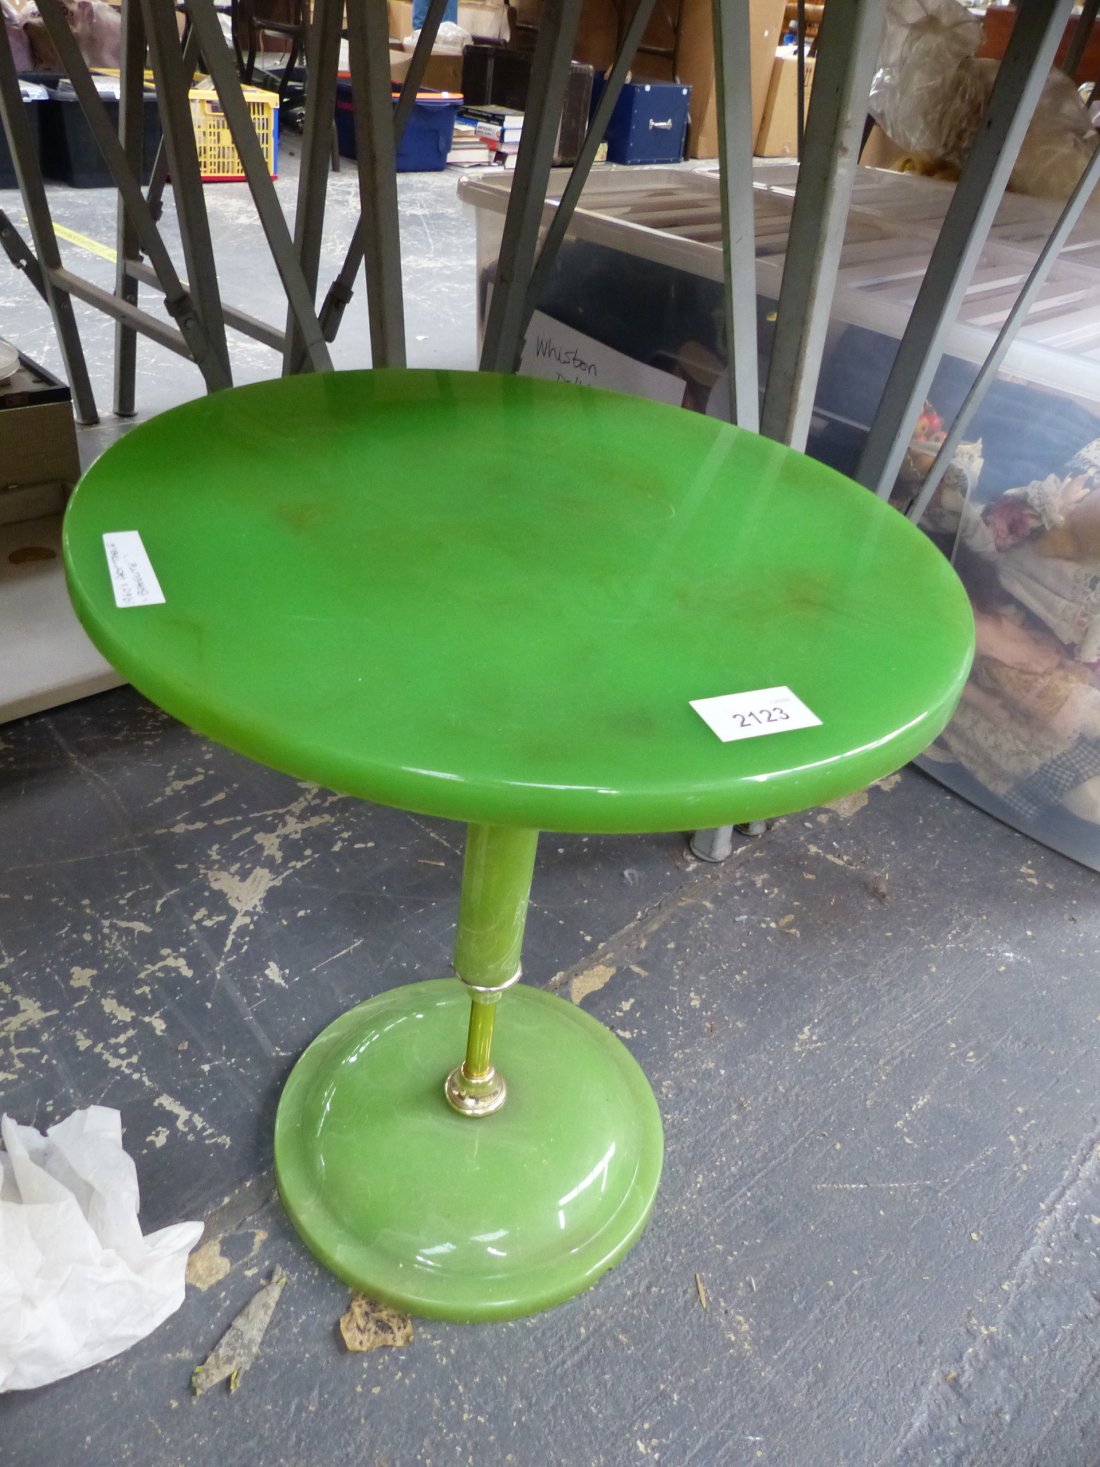 A VINTAGE MID CENTURY RETRO OCCASIONAL TABLE.